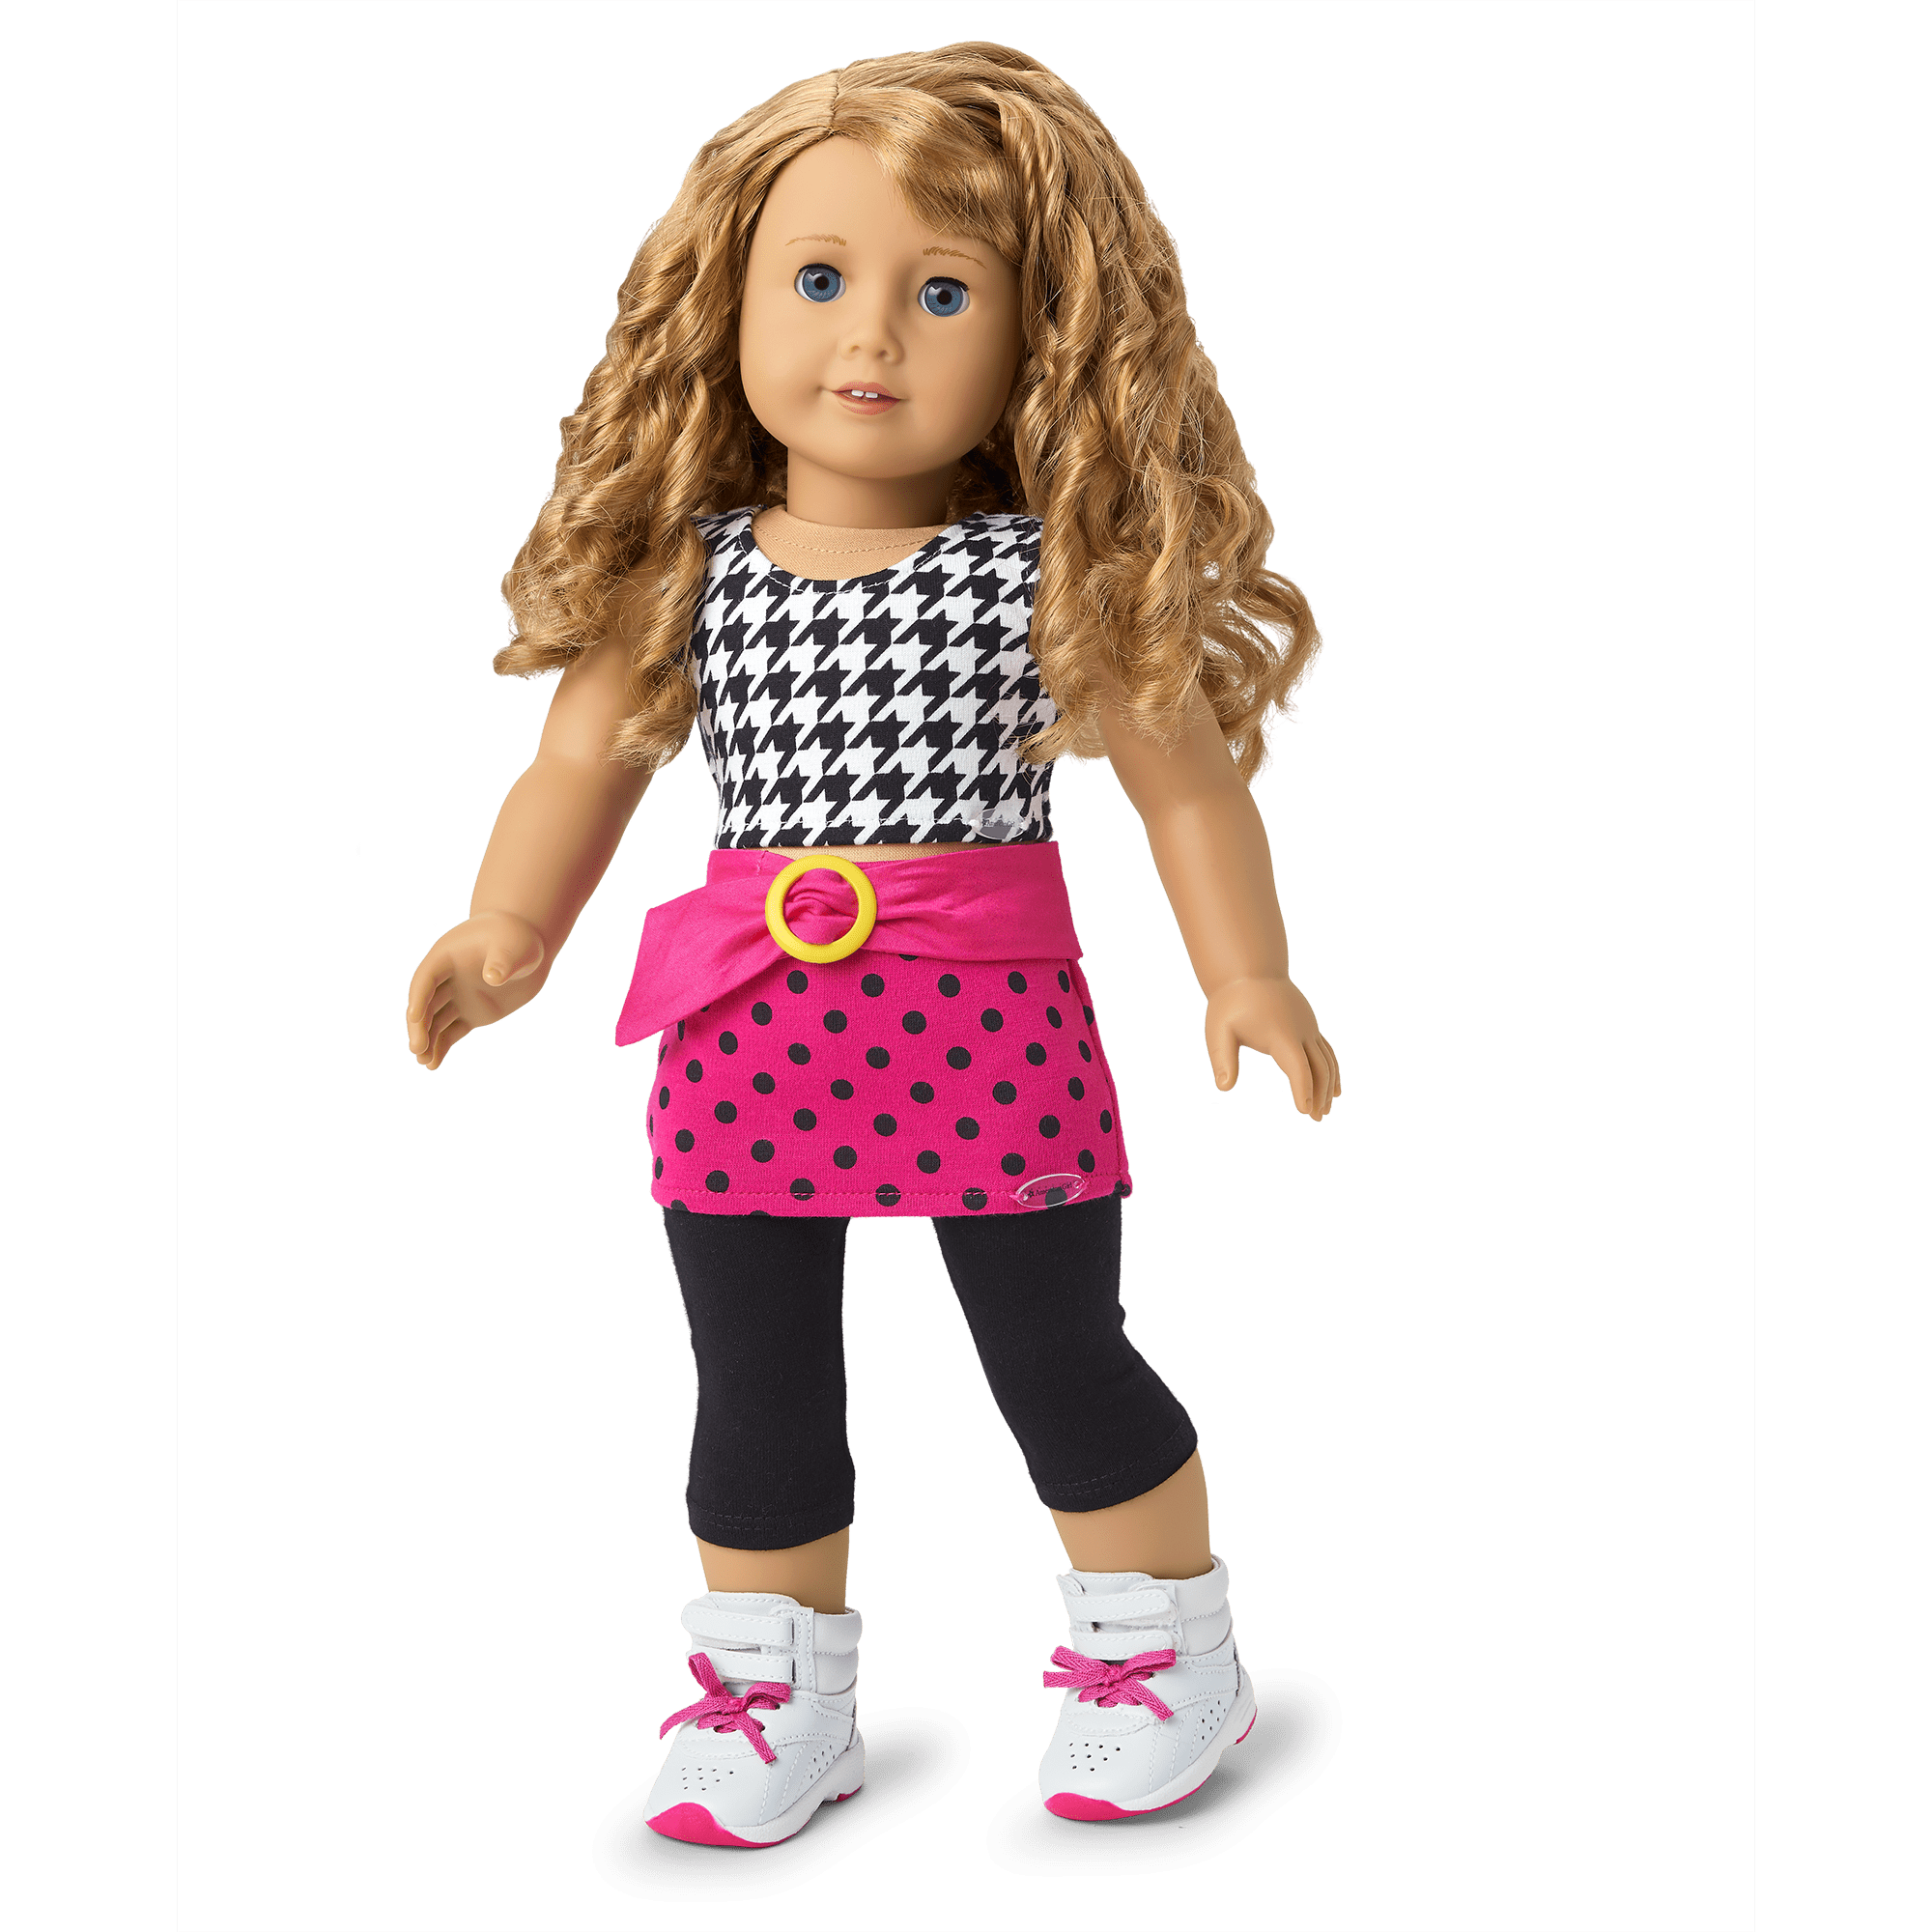 Doll Clothes Yoga Dance Outfit Black and White Fits 18 inch American Girl